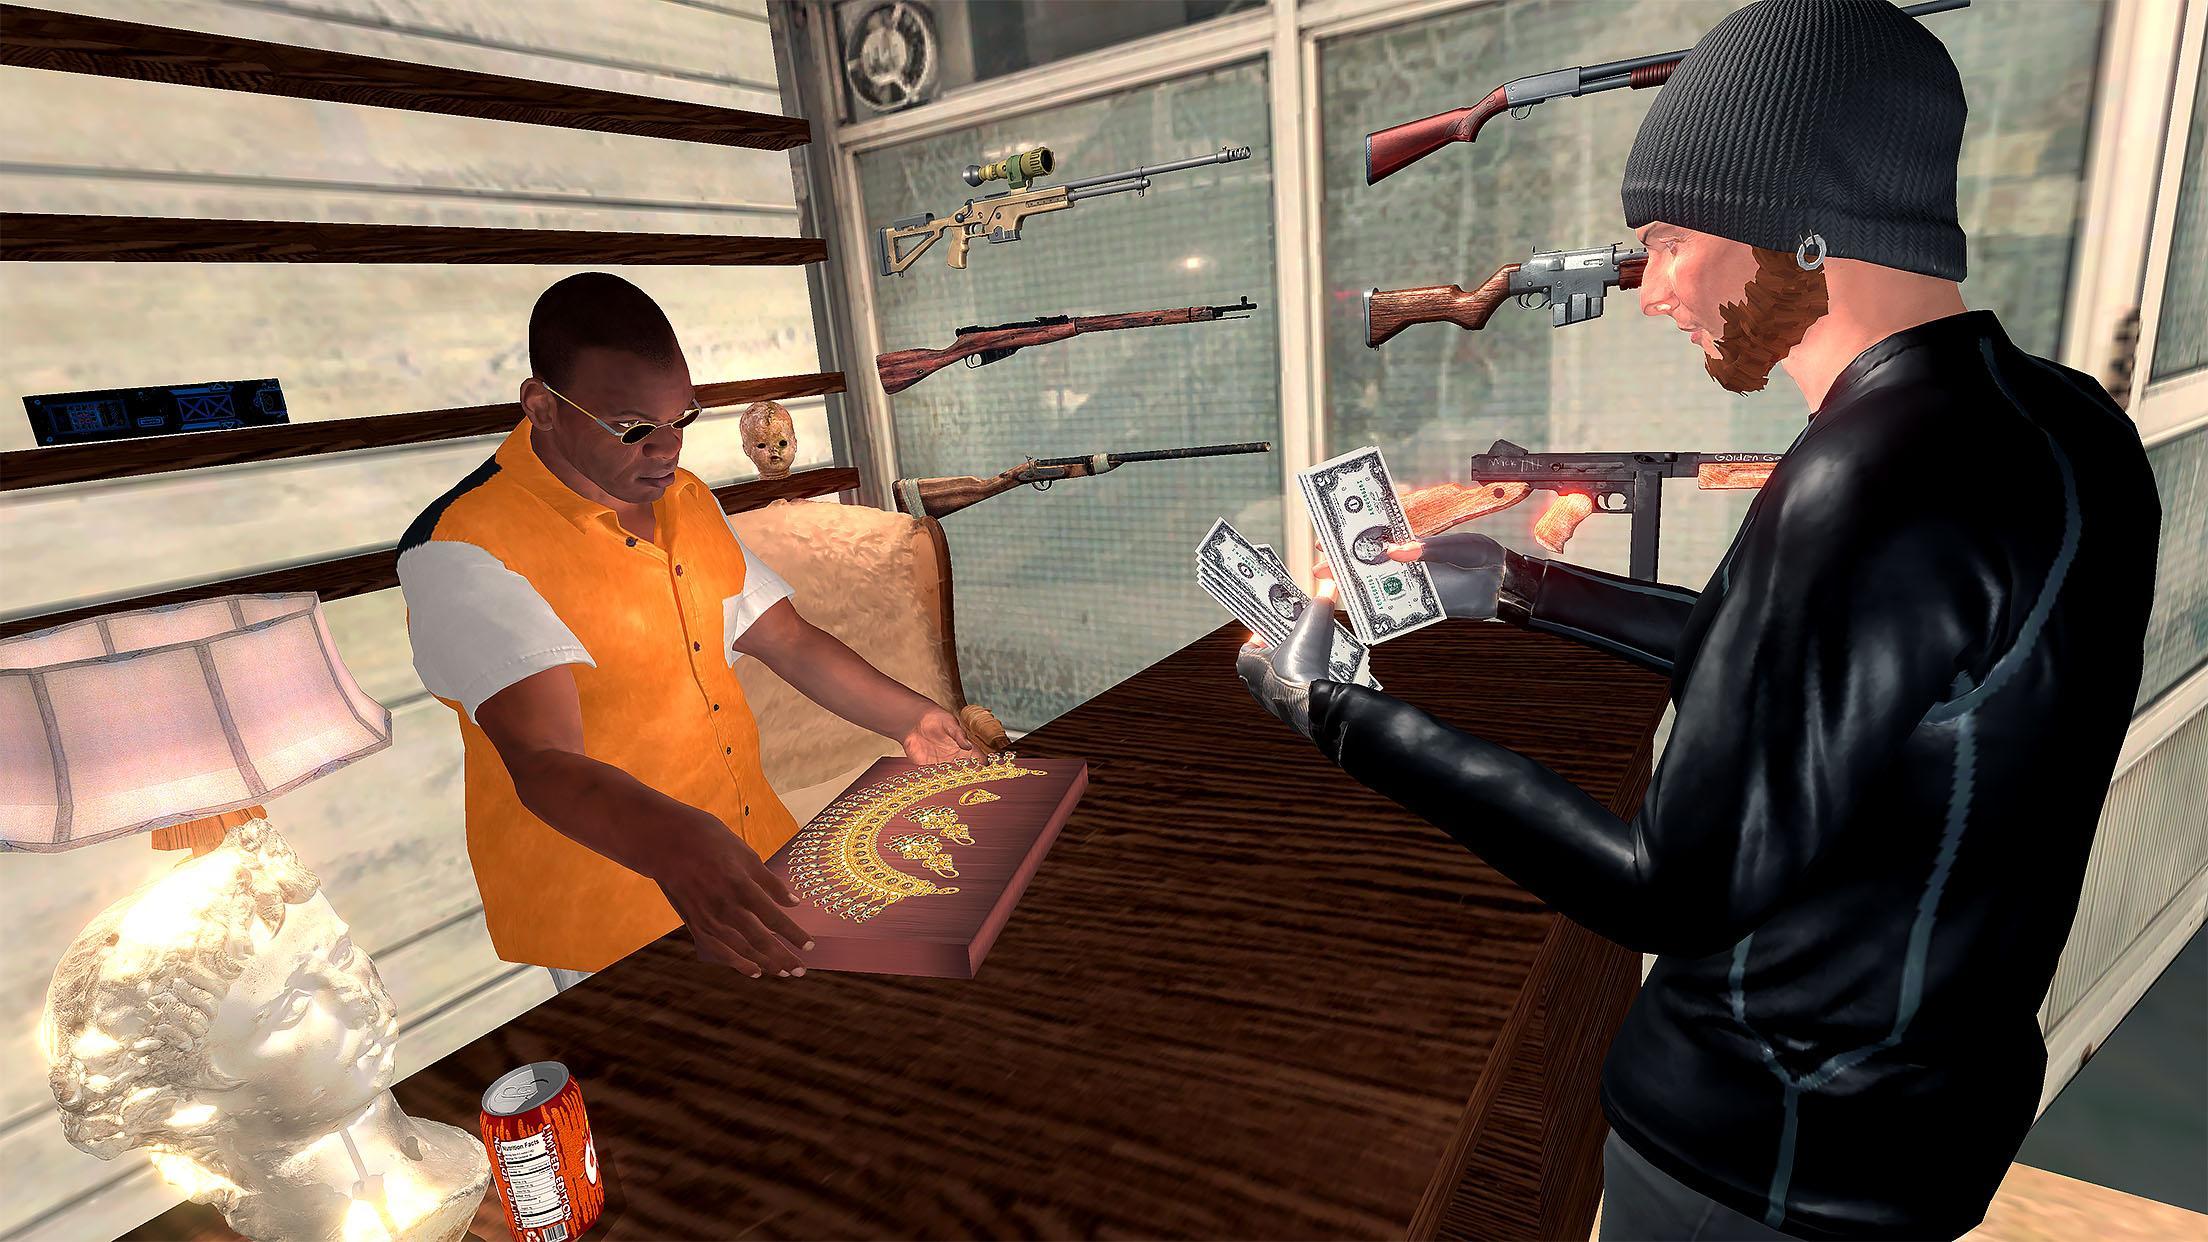 Heist Thief Robbery Sneak Simulator For Android Apk Download - roblox thief life simulator how to rob bank